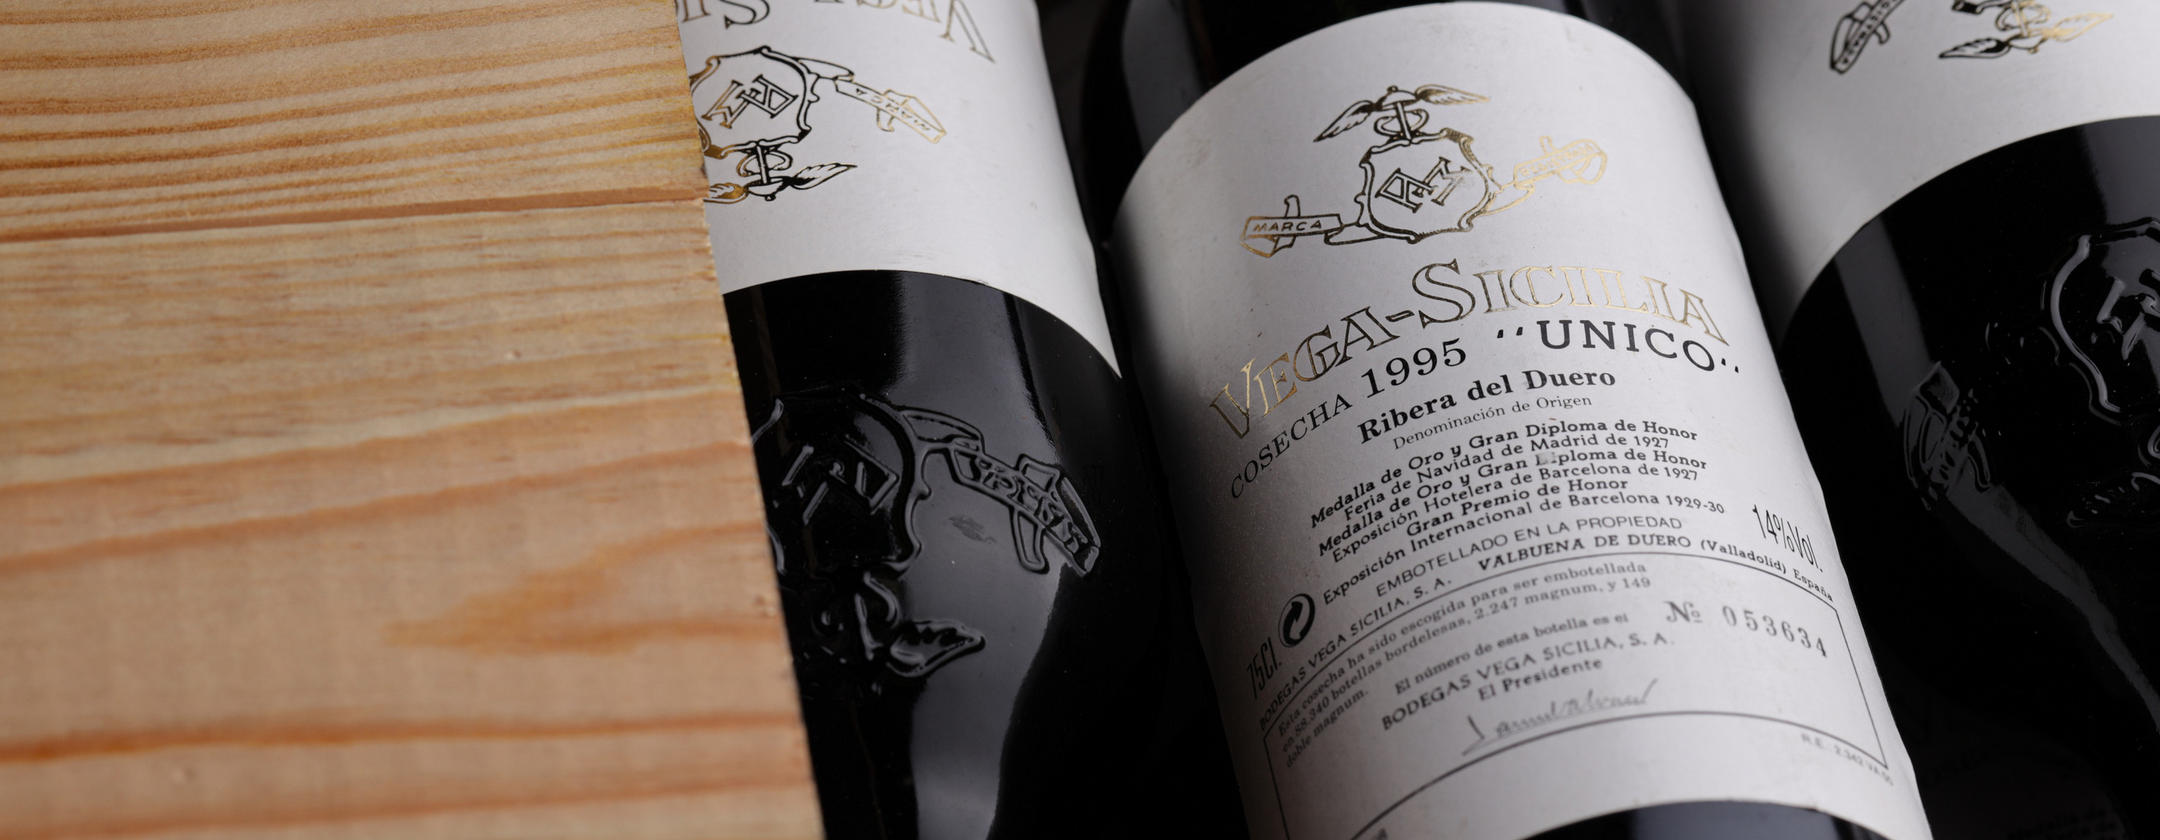 Vega Sicilia’s latest releases _ Discover exceptional quality from one of Spain's top producers